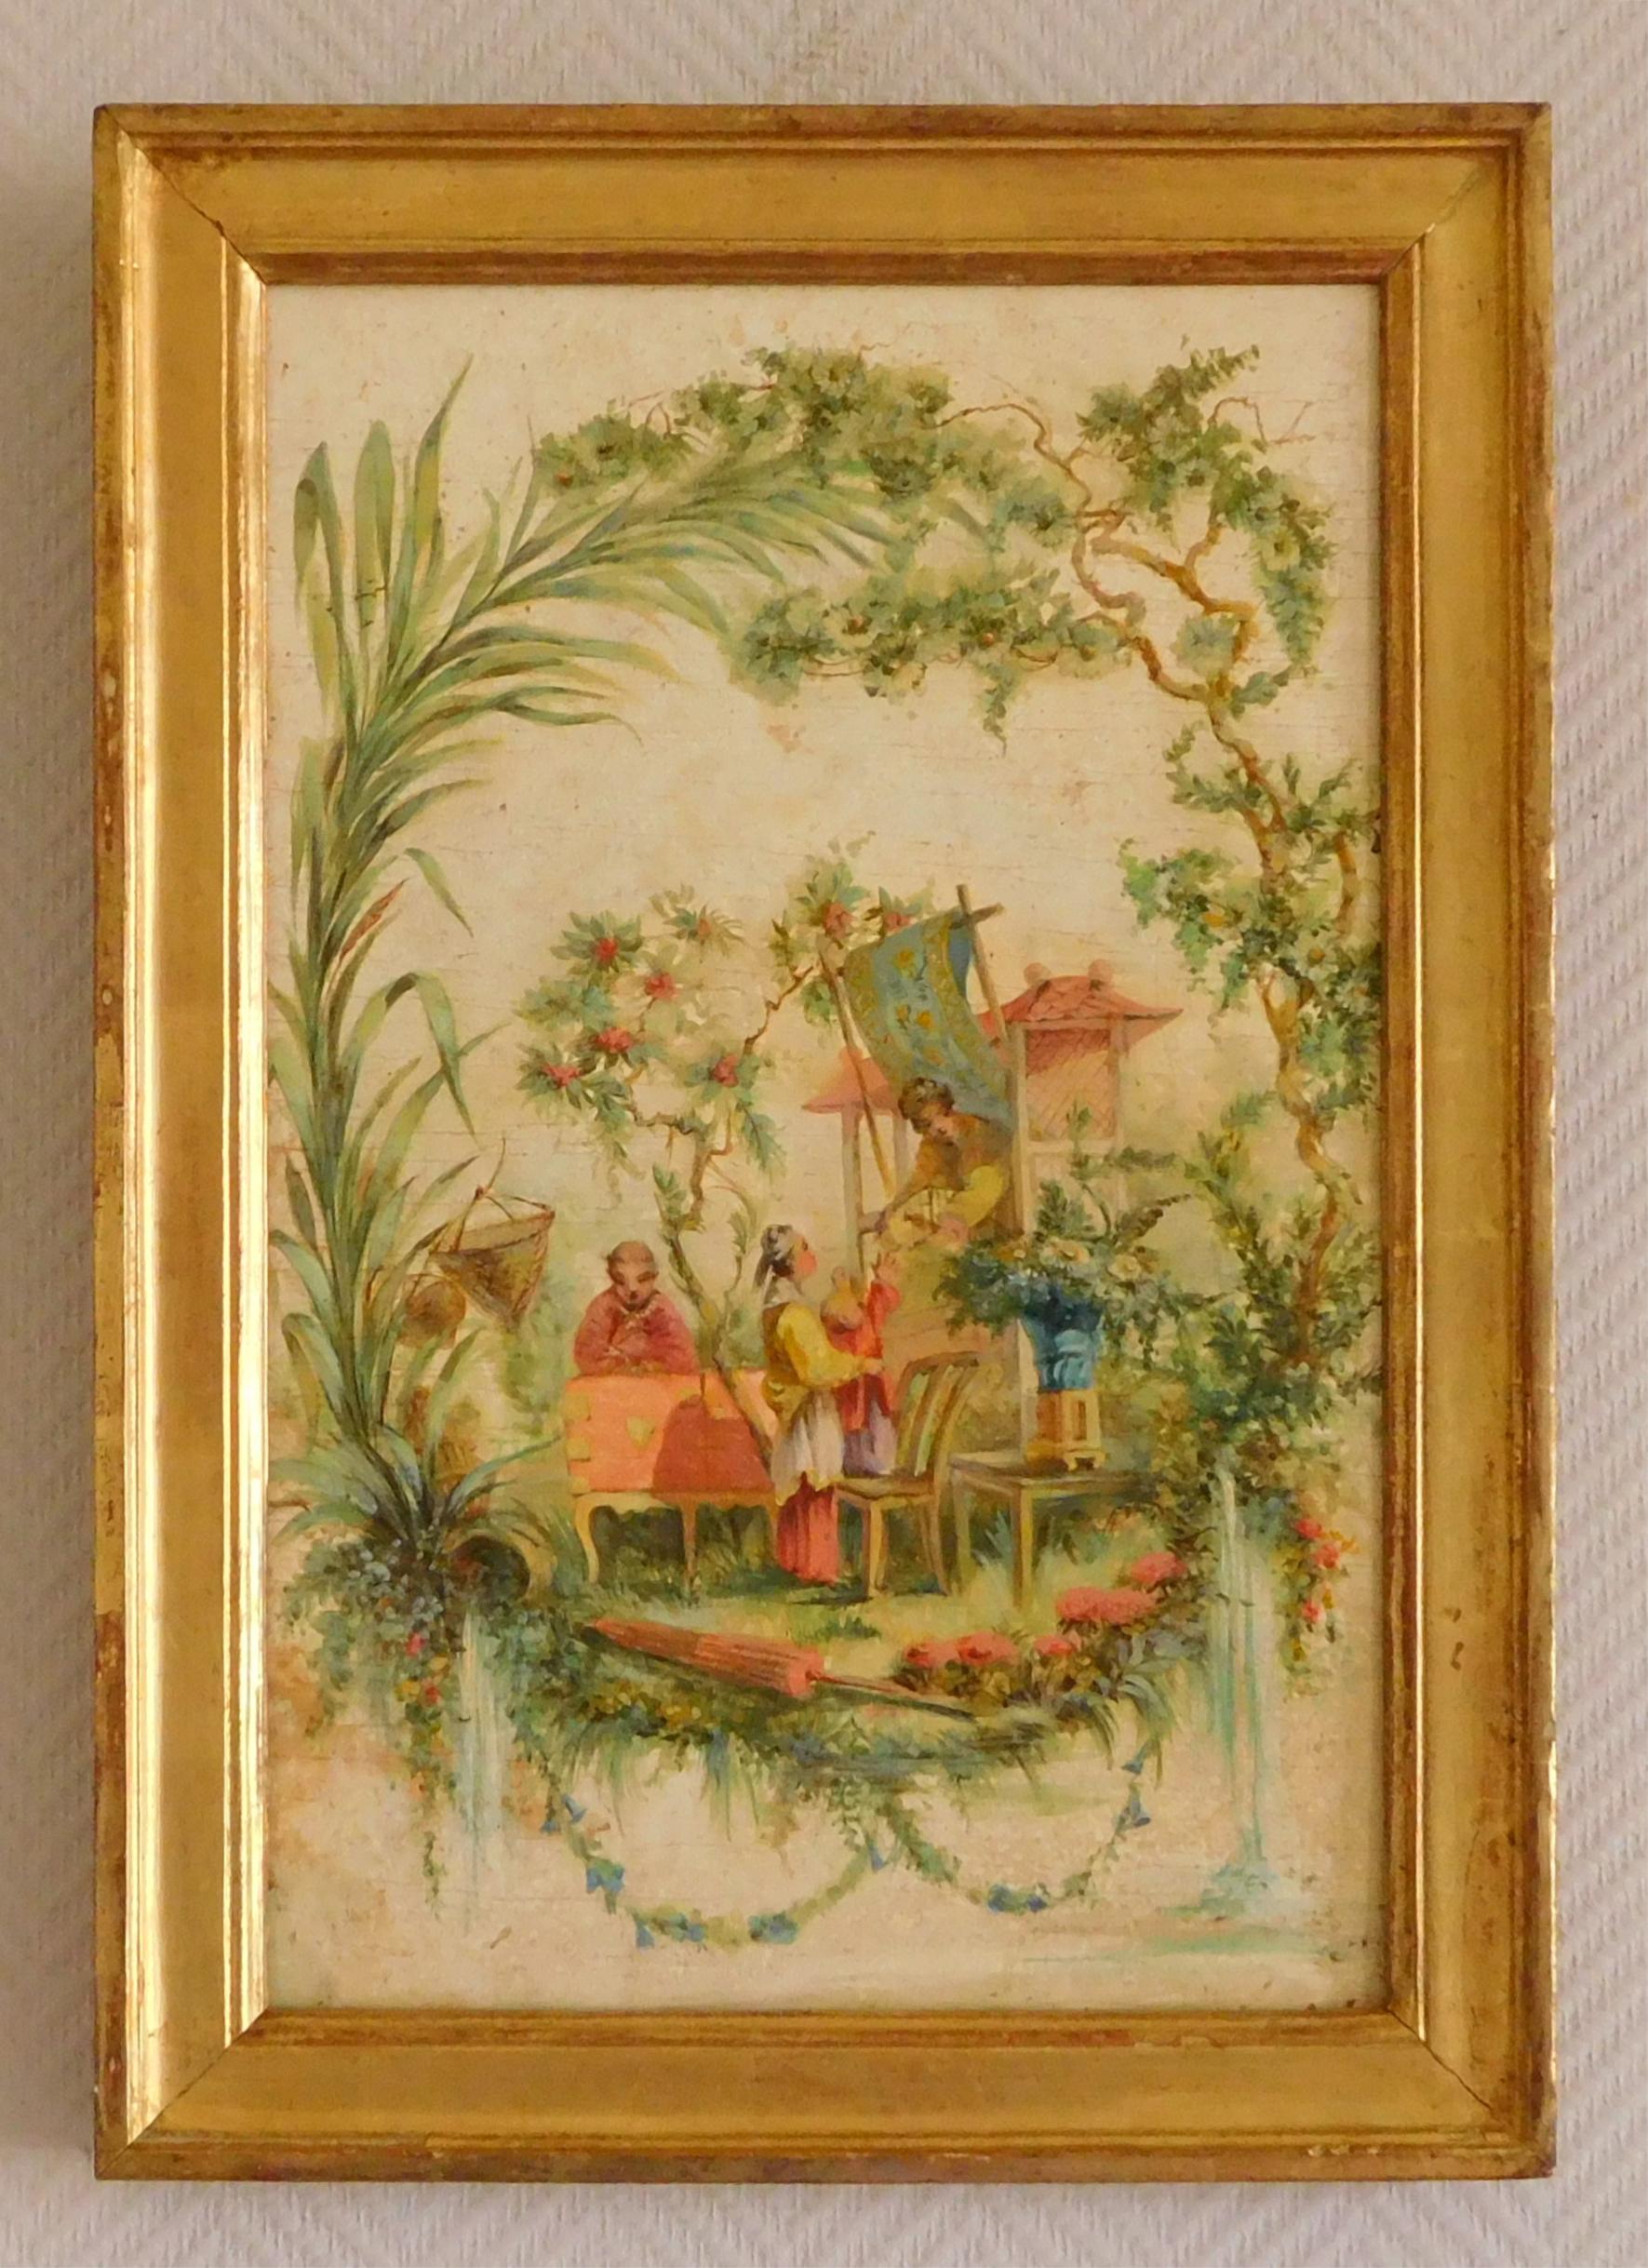 Late 18th century or early 19th century French school circa 1800, Louis XV style oil on panel picturing Chinese people in an ideal garden with a pagoda, a harpsichord : a beautiful 18th century style chinoiserie, showing an idyllic vision of China